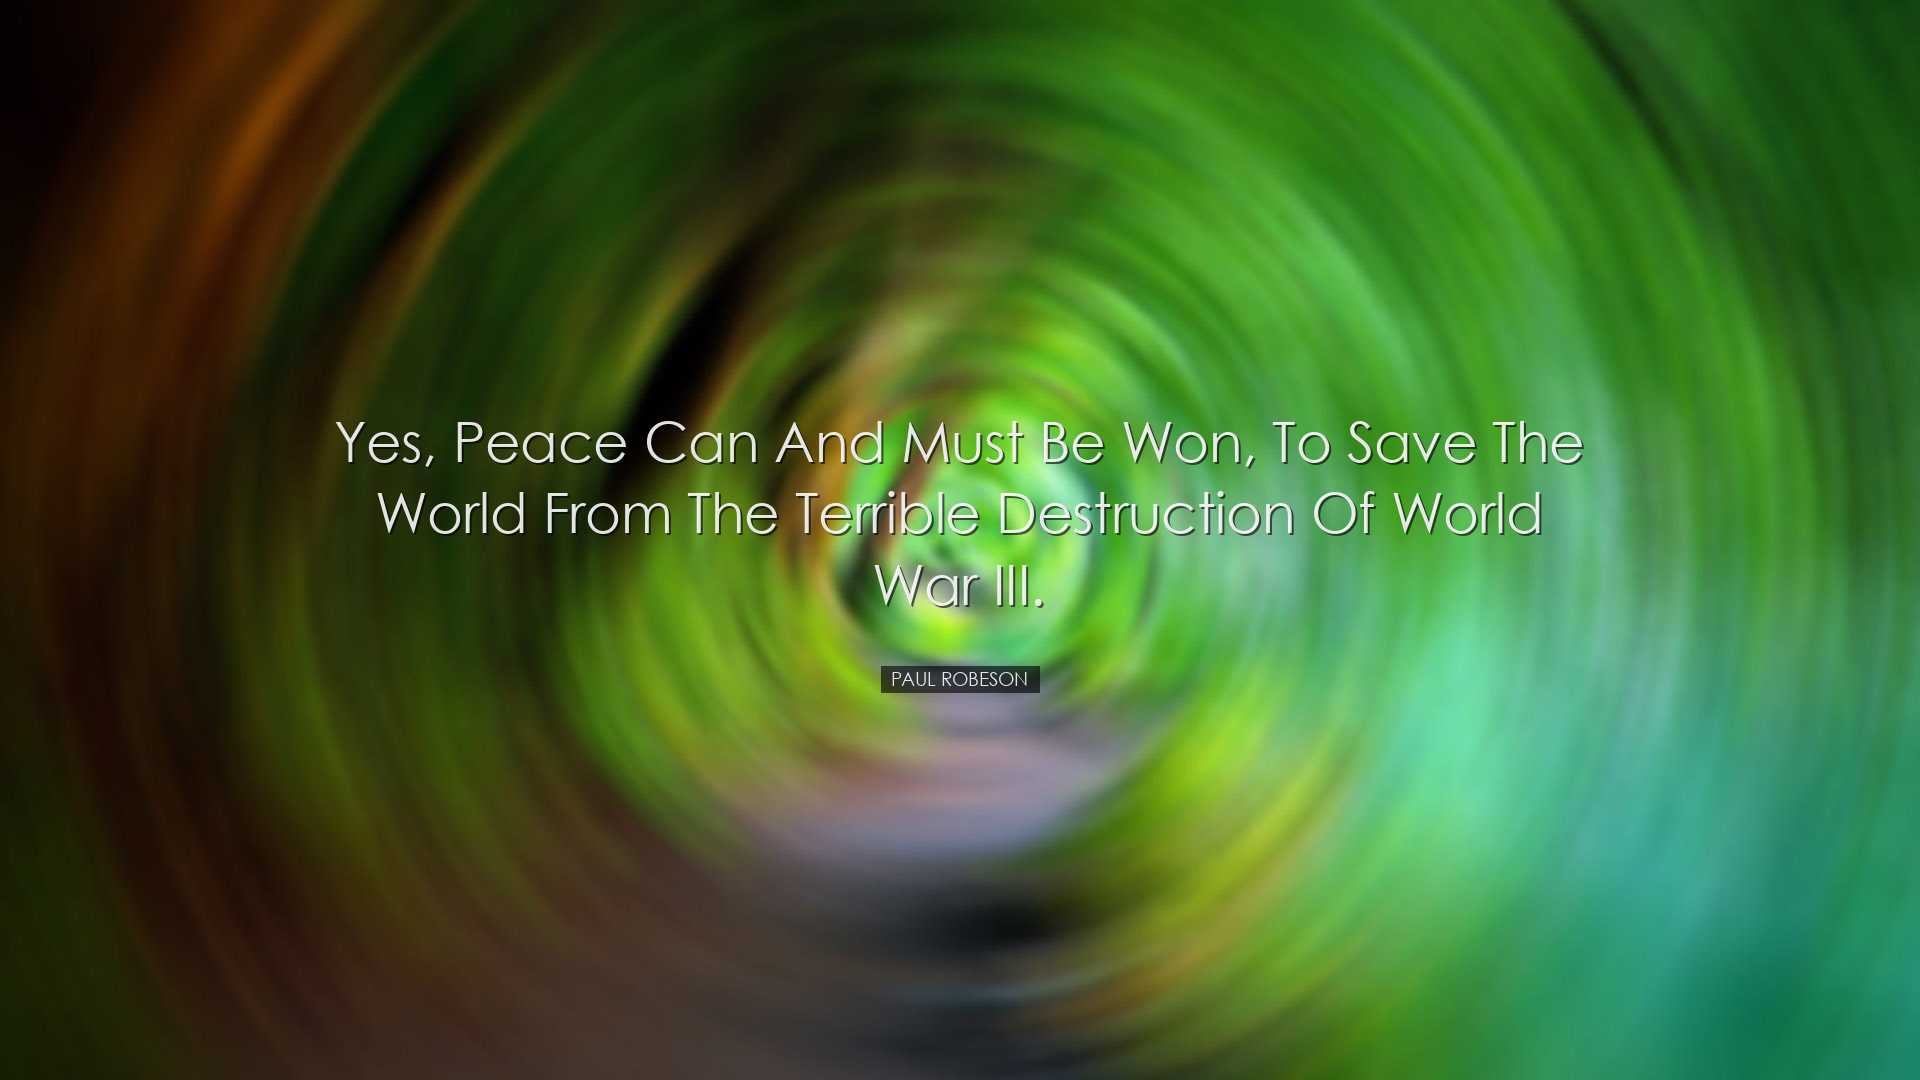 Yes, peace can and must be won, to save the world from the terribl